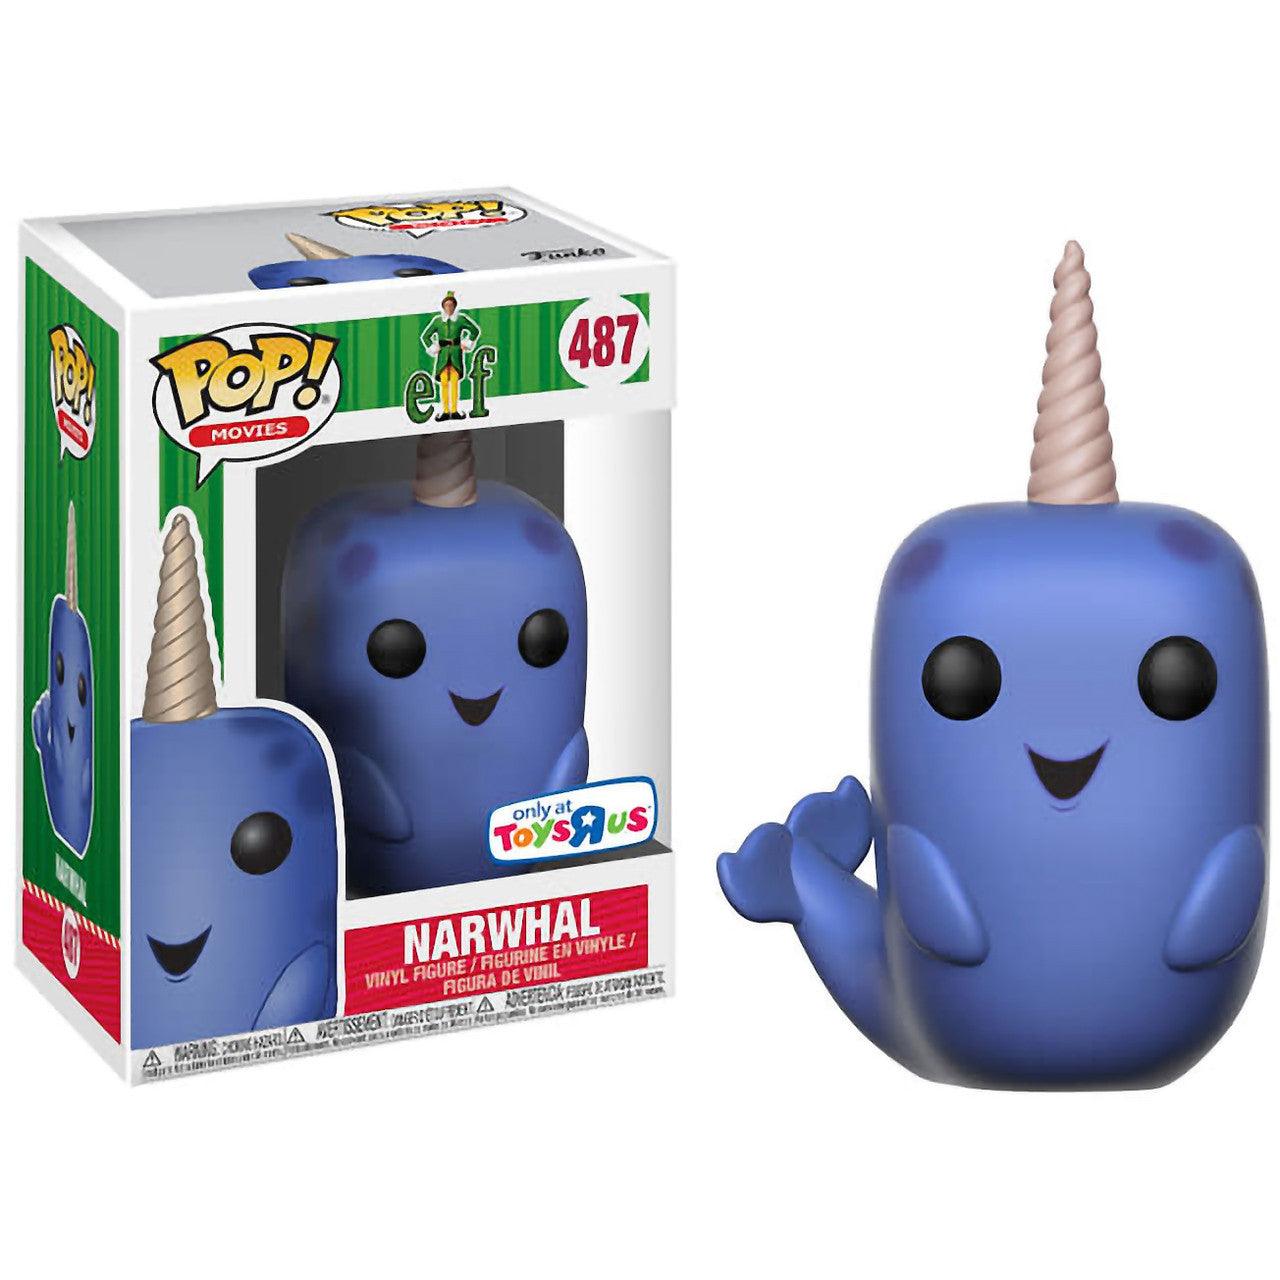 Pop! Movies - Narwhal - #487 - Toys "R" Us EXCLUSIVE - Hobby Champion Inc